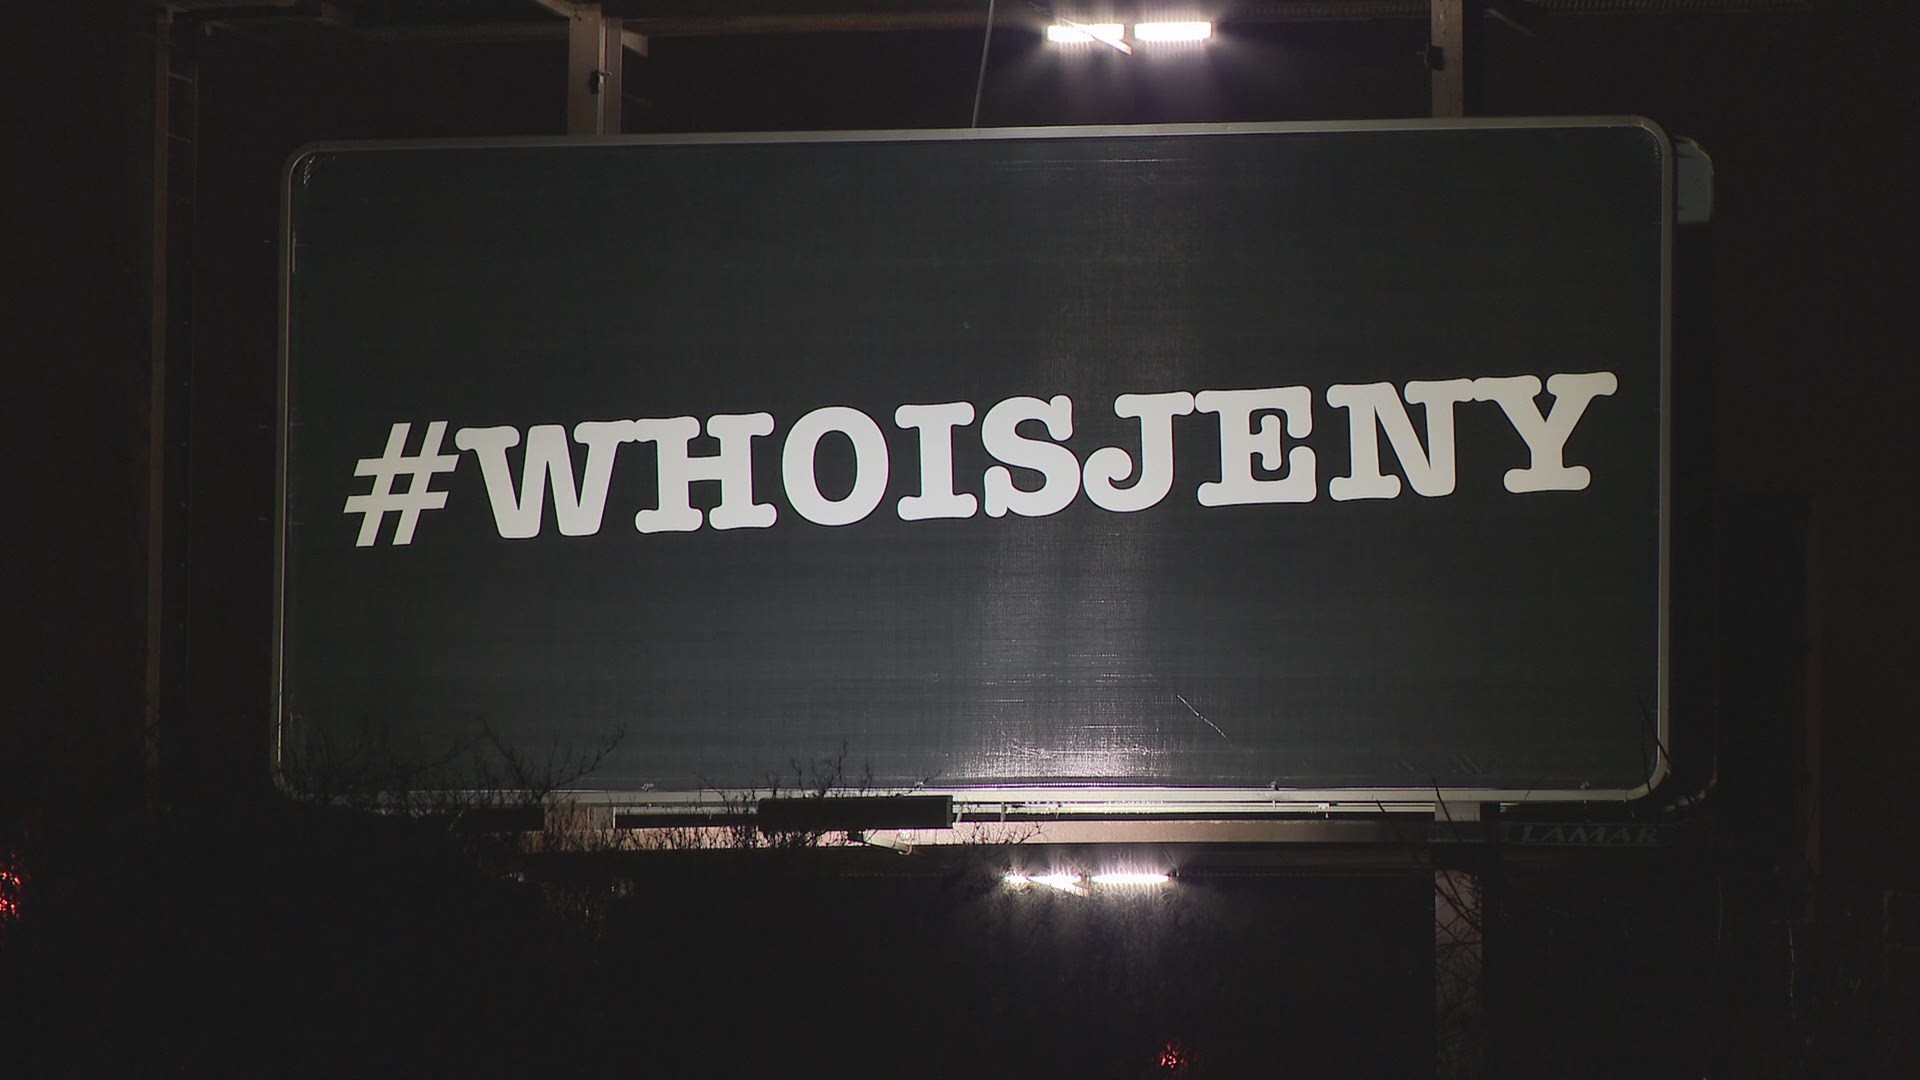 For more than a week, people in Northeast Ohio have been wondering what is the #WhoIsJeny billboard. Have you seen it?